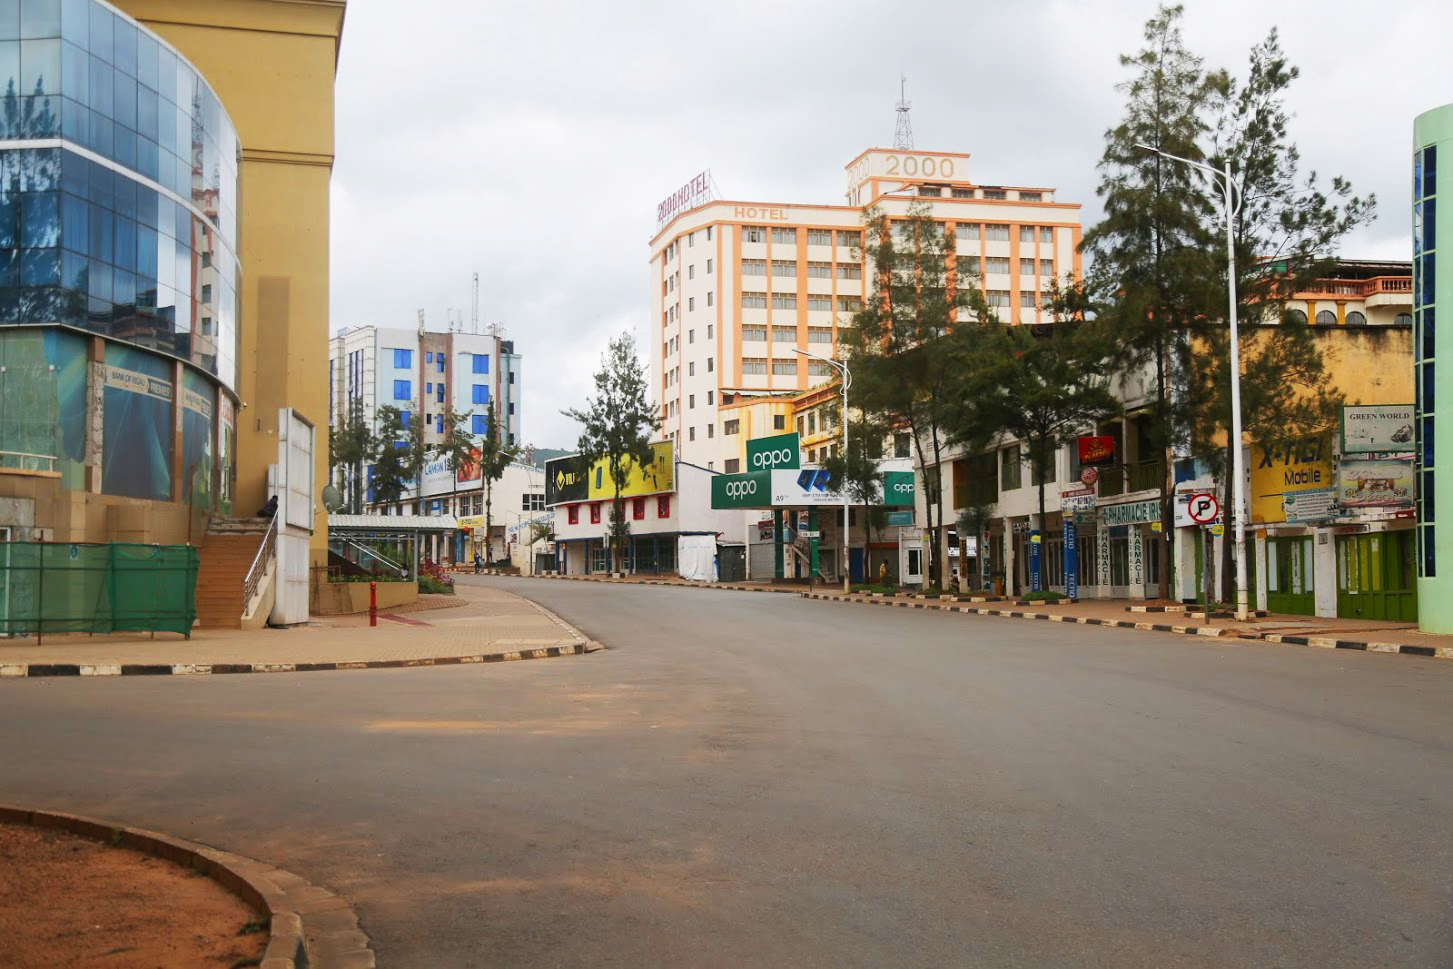 City of Kigali's Central Business District during the Covid-19 lockdown as business activity was halted. 